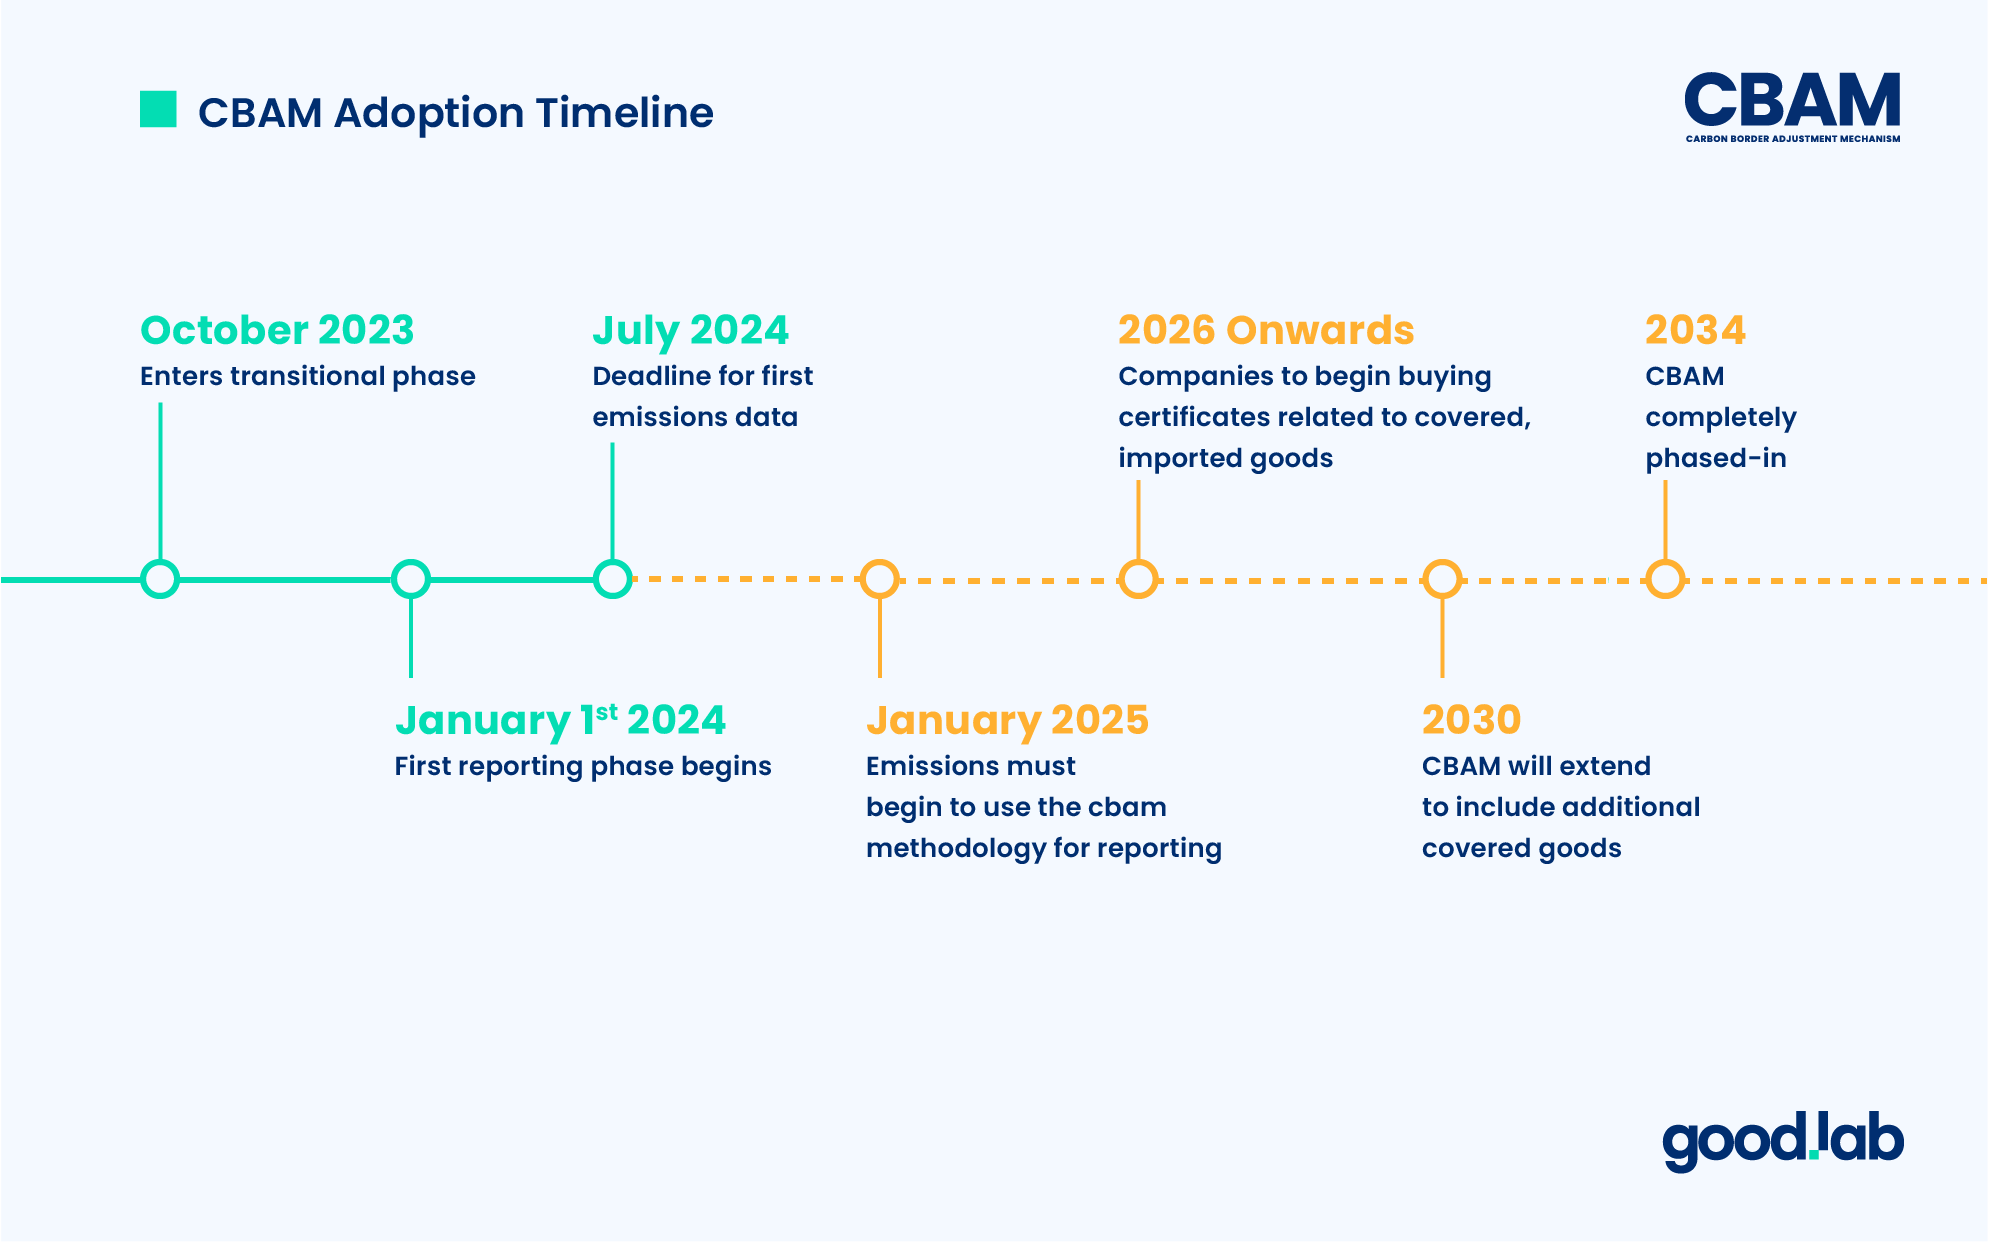 A simple timeline showing how the EU's Carbon Border Adjustment Mechanism will be adopted.